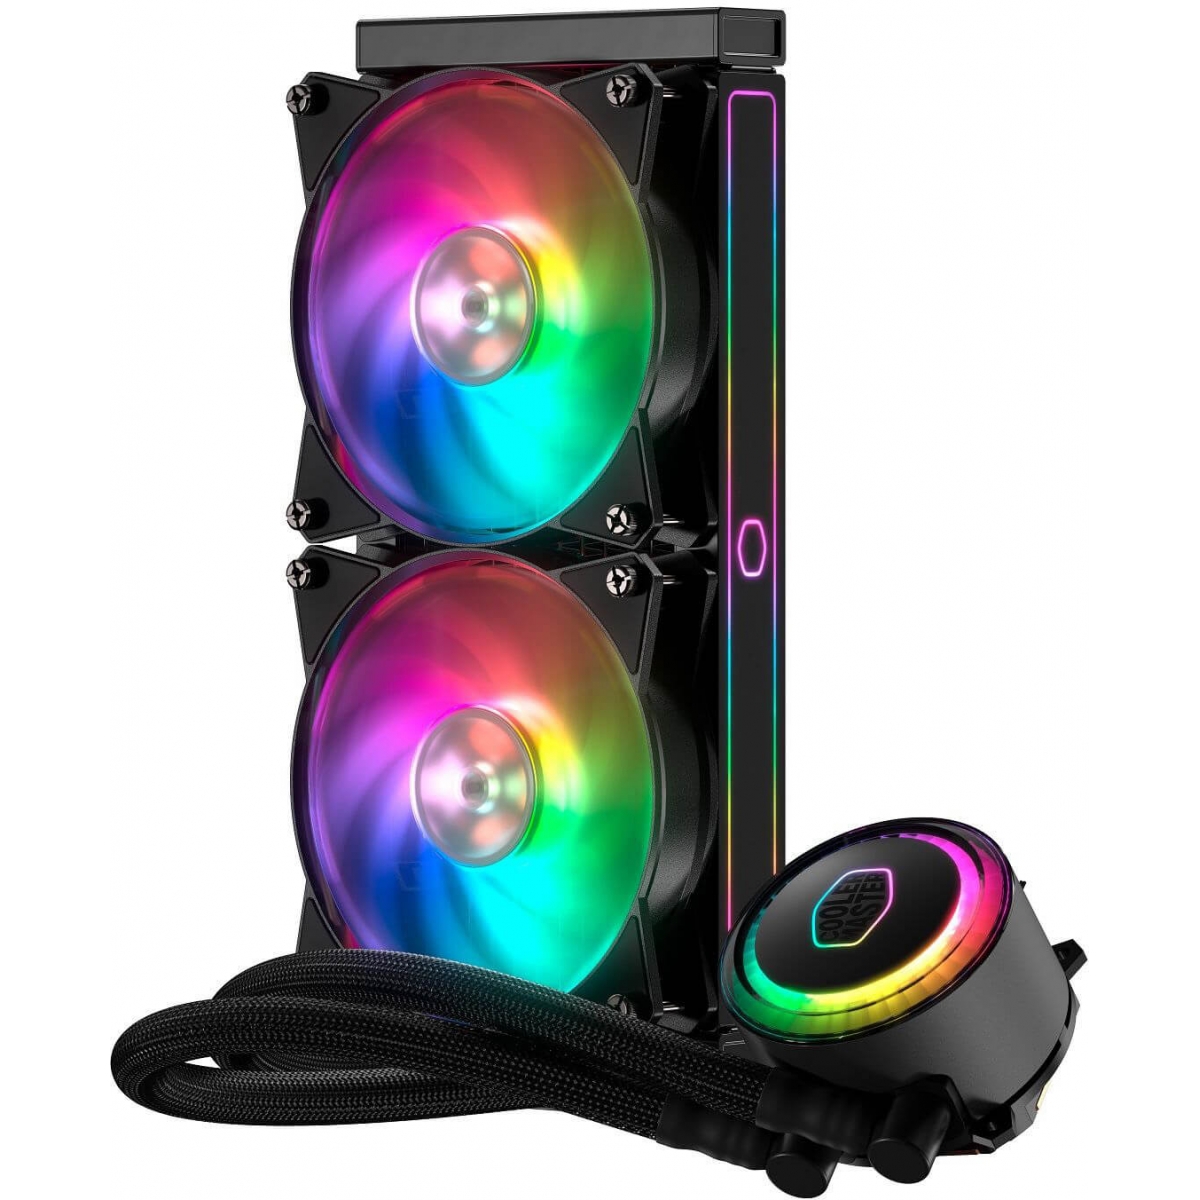 Water Cooler Cooler Master MasterLiquid ML240RS, RGB 240mm, Intel-AMD, MLX-S24M-A20PC-R1